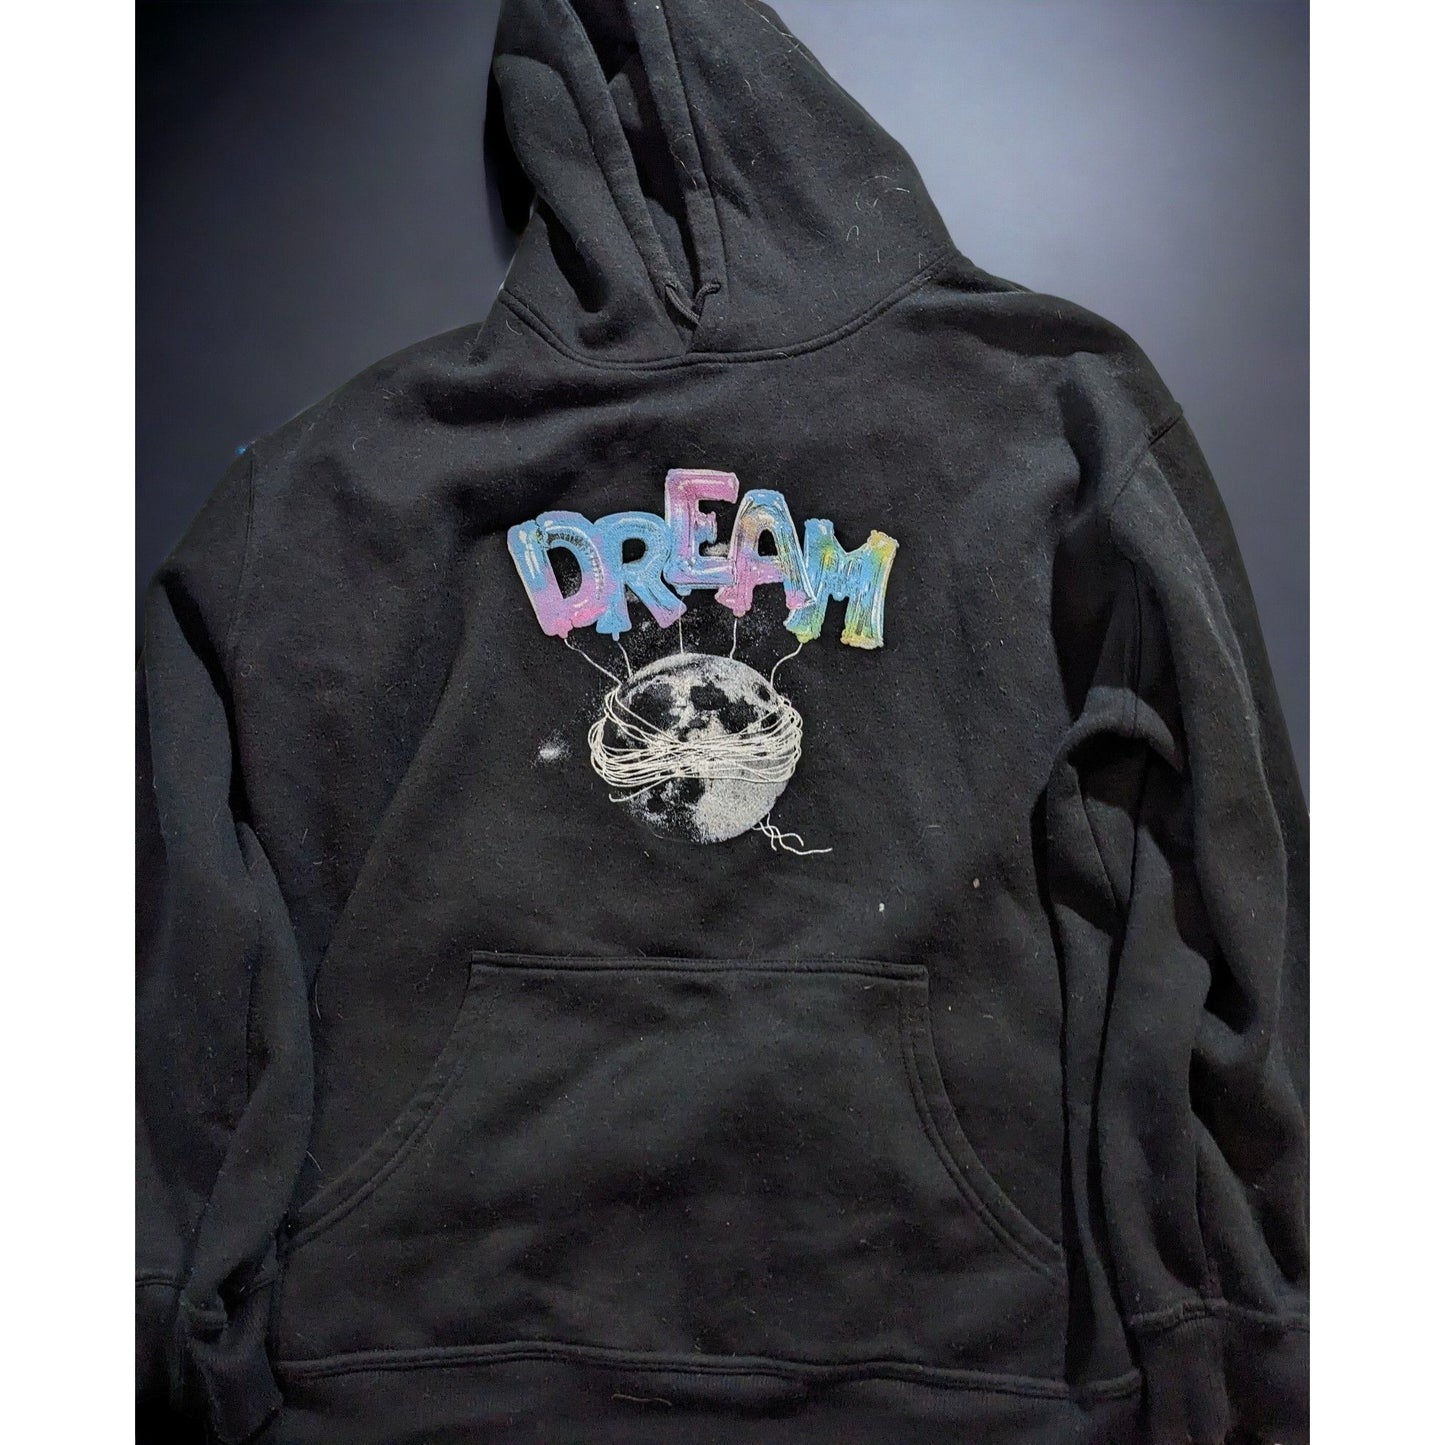 Dream SMP 29 Million Subscribers Limited Edition Hoodie